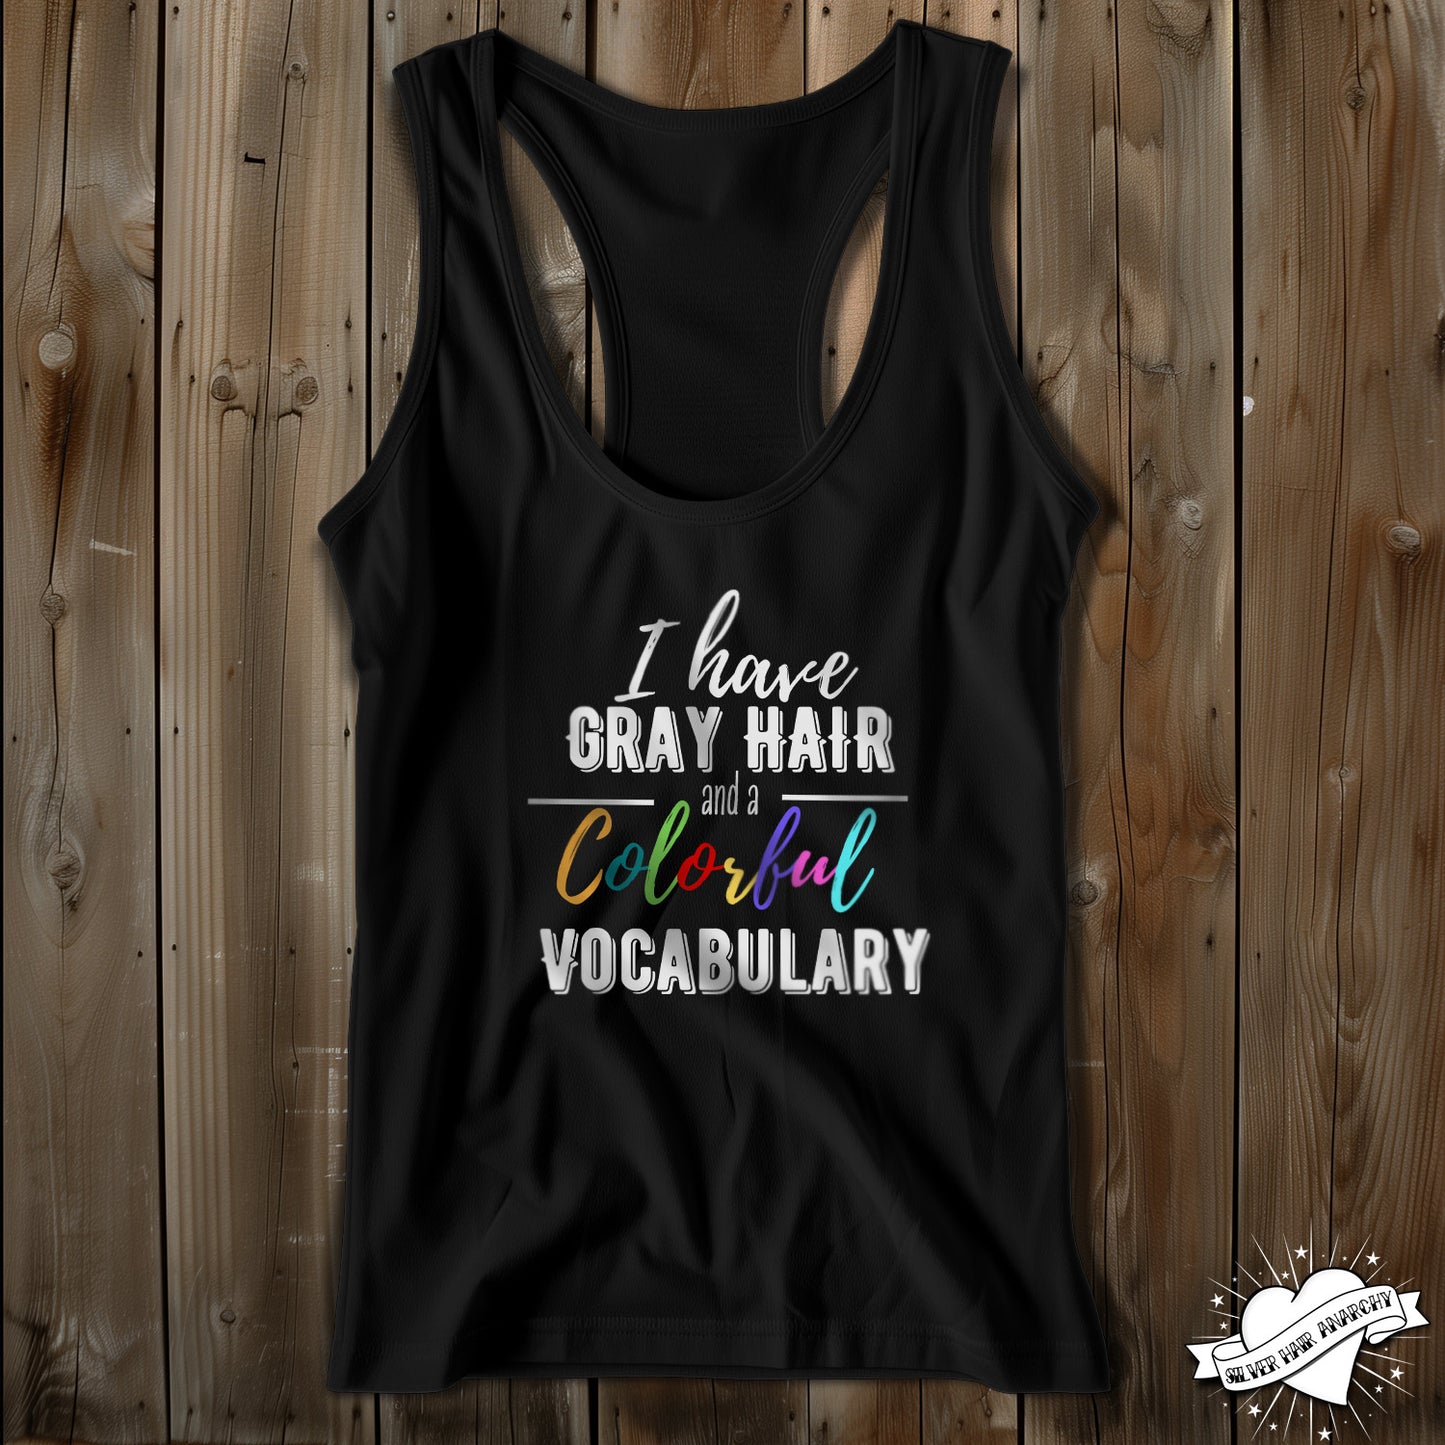 Colorful Vocabulary. Women's Ideal Racerback Tank